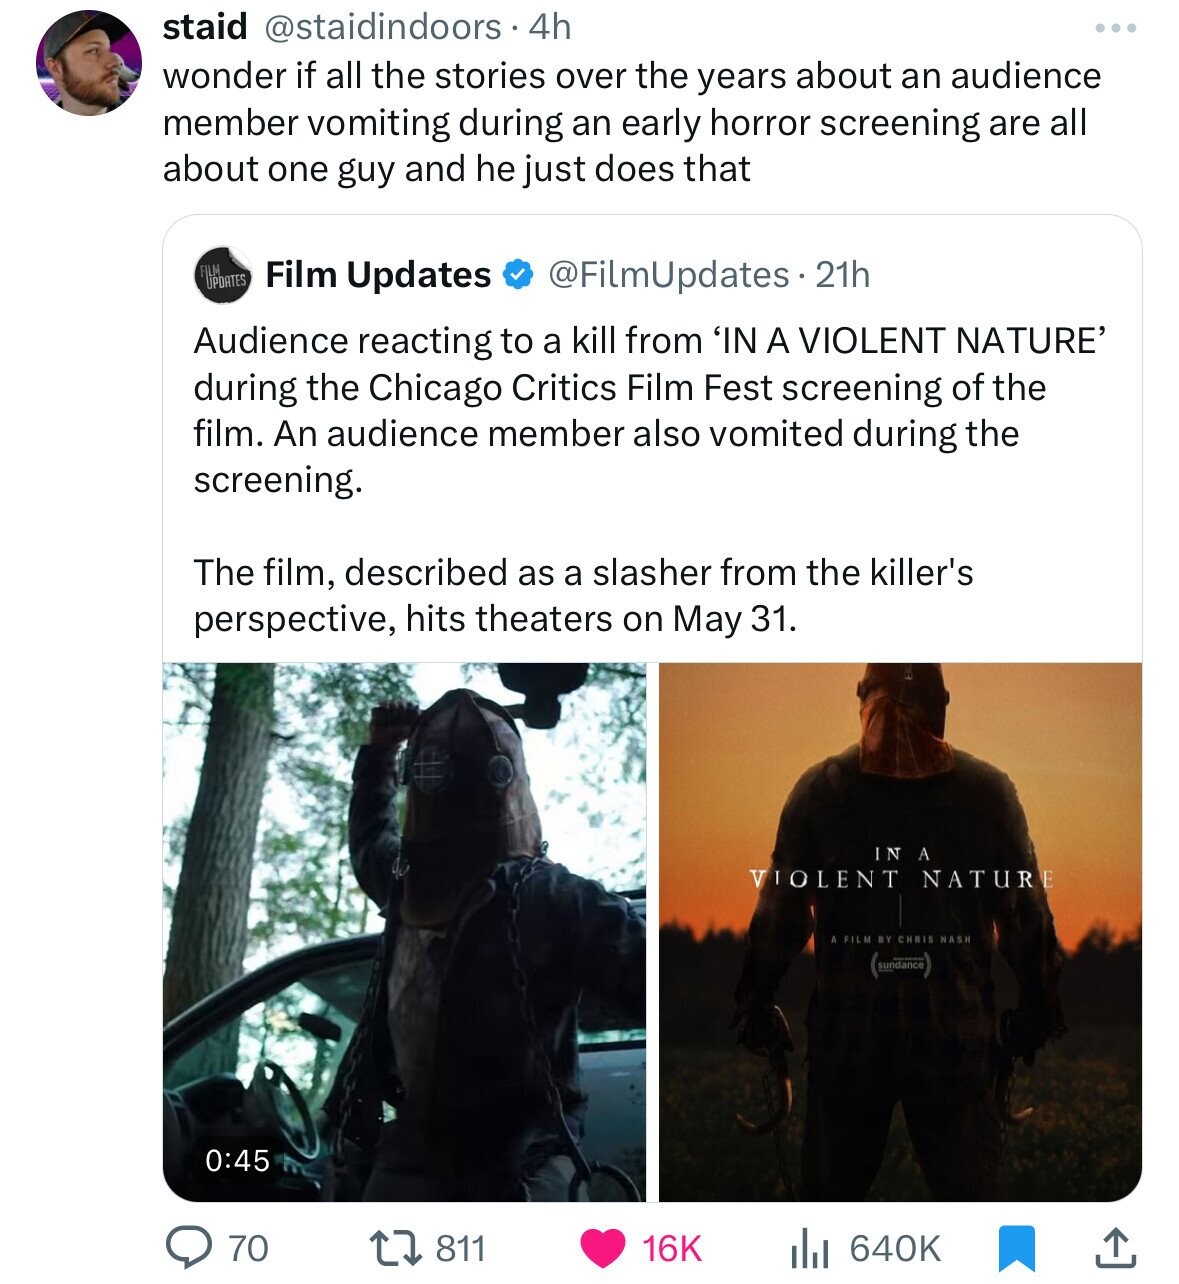 screenshot - staid 4h wonder if all the stories over the years about an audience member vomiting during an early horror screening are all about one guy and he just does that Updates Film Updates 21h Audience reacting to a kill from In A Violent Nature' du